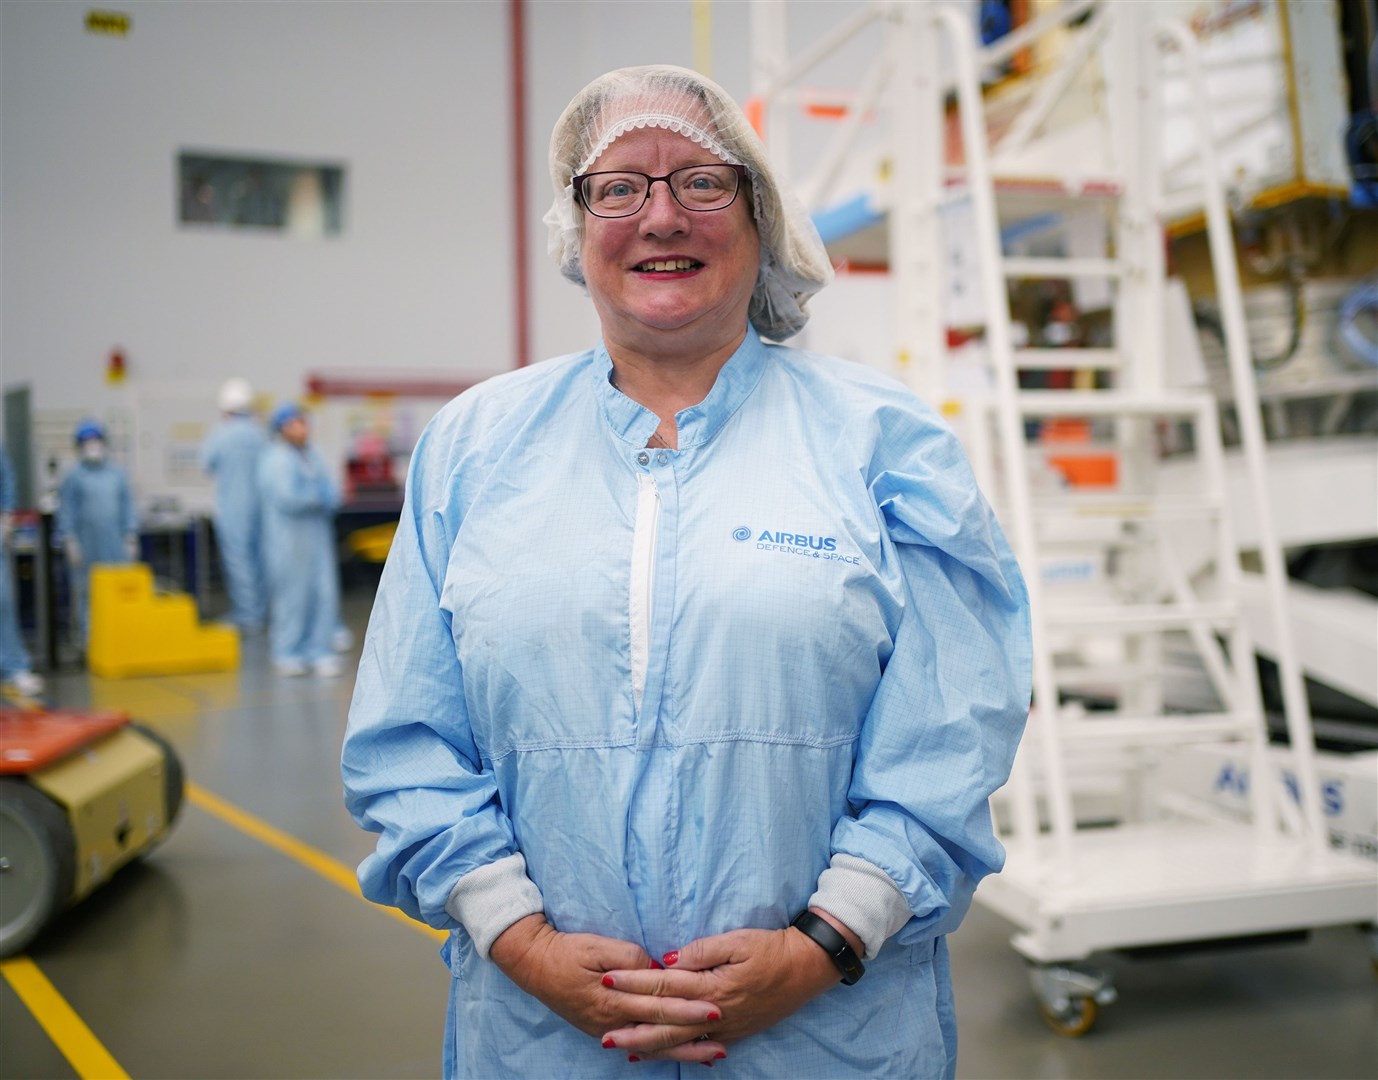 Maria Cody, head of ESA policy at the UK Space Agency, at the Airbus factory in Hertfordshire (Yui Mok/PA)